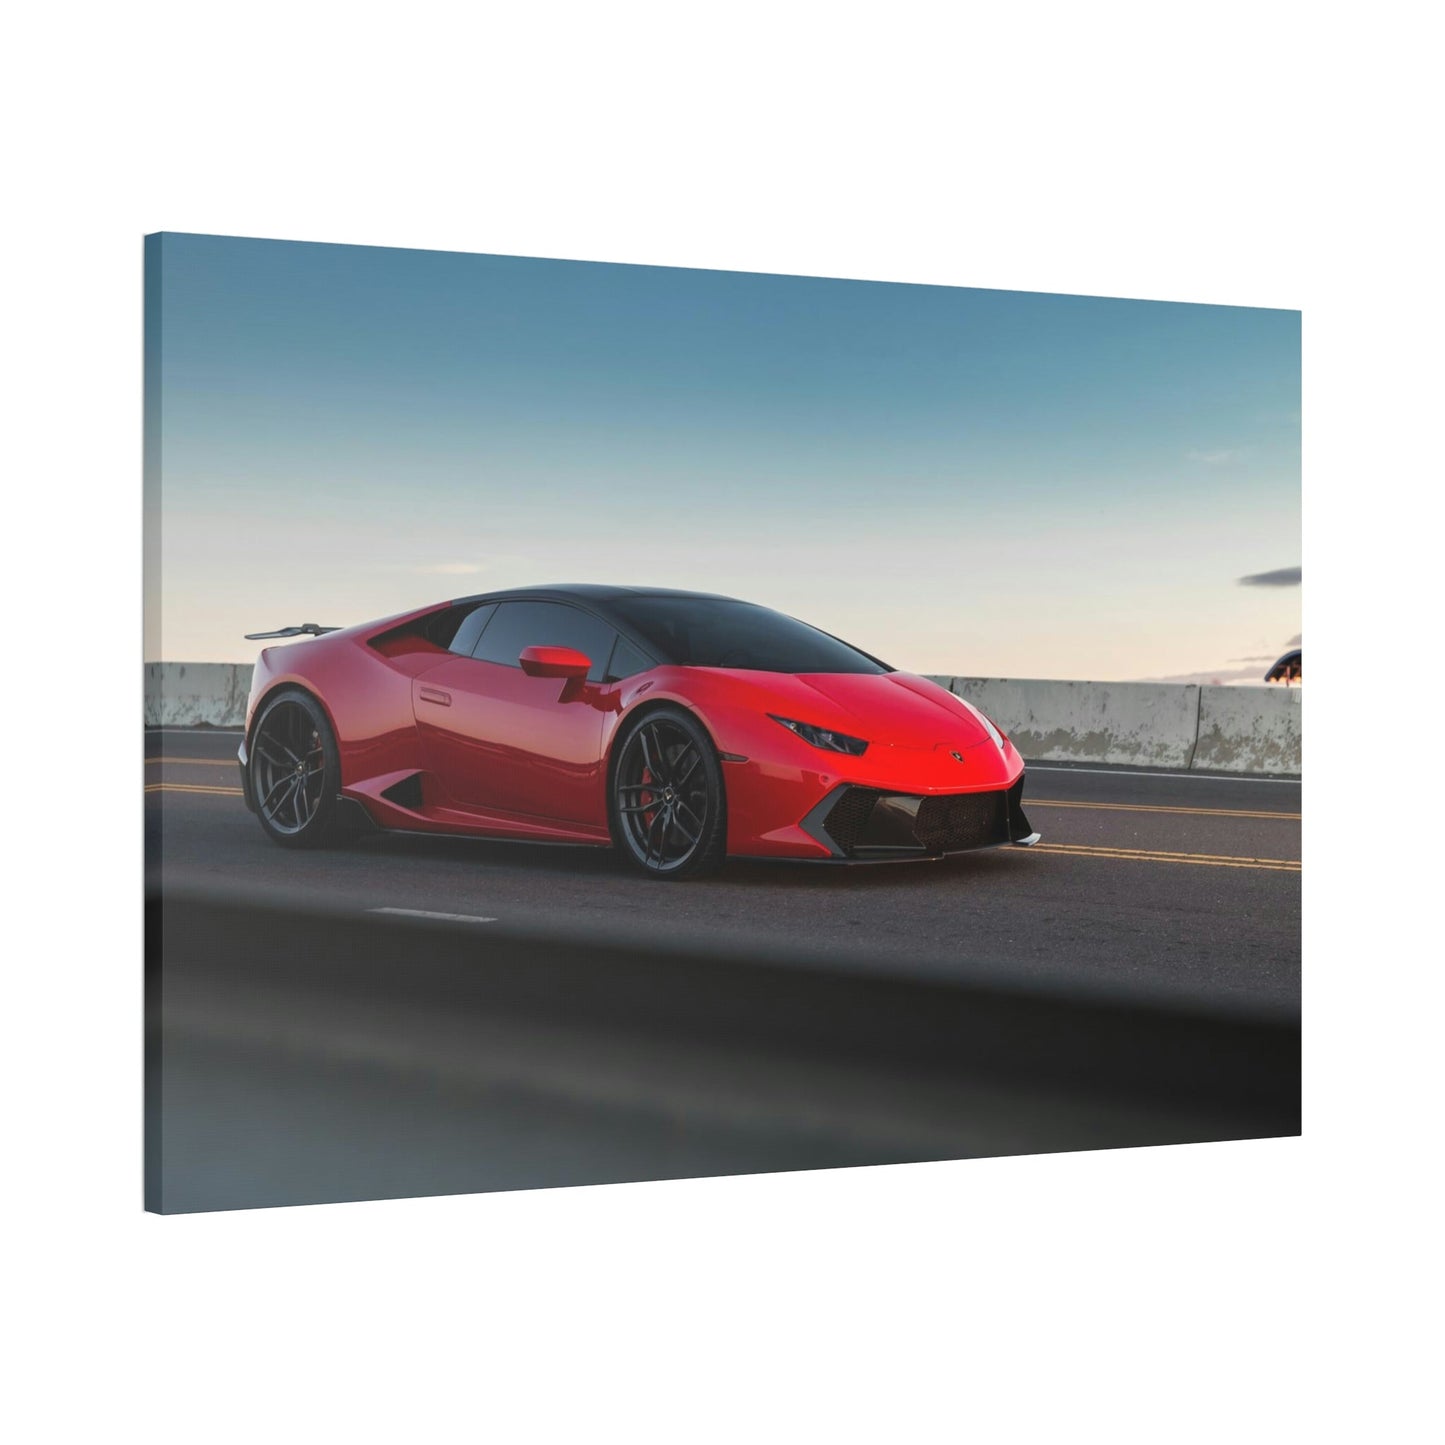 Racing into the Future: Lamborghini Canvas & Poster on High-Quality Print